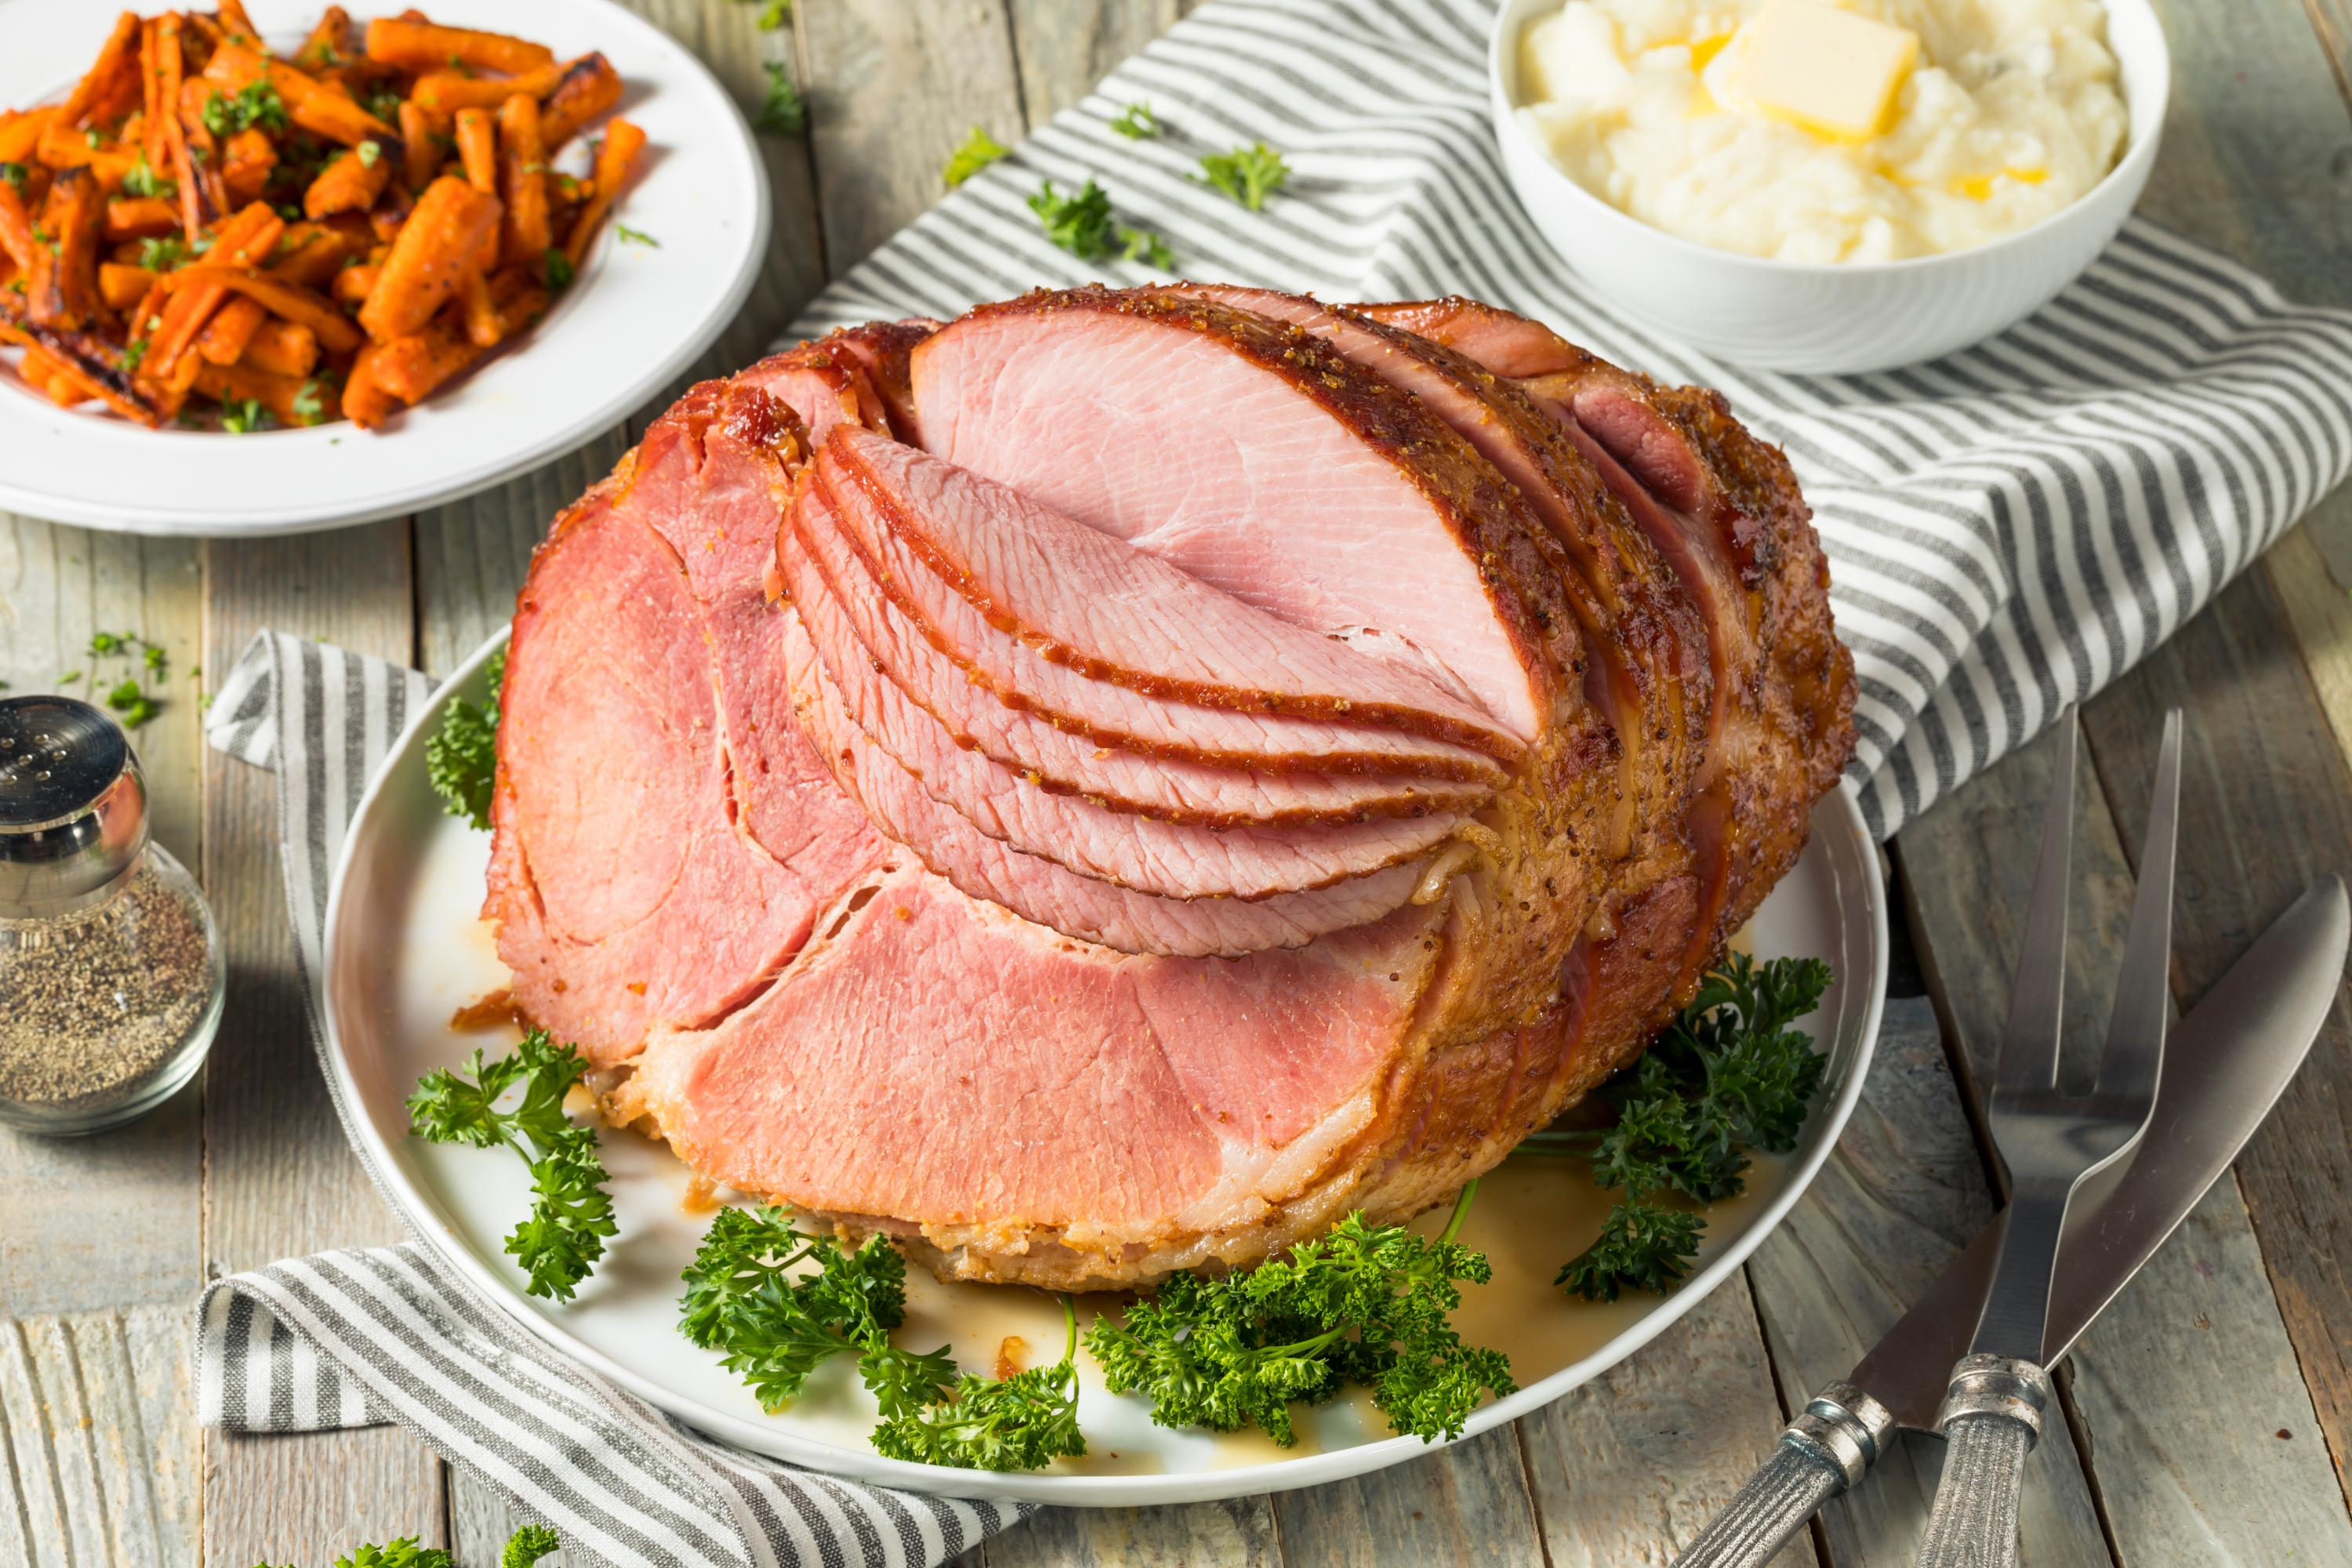 How to Oven Cook Ham